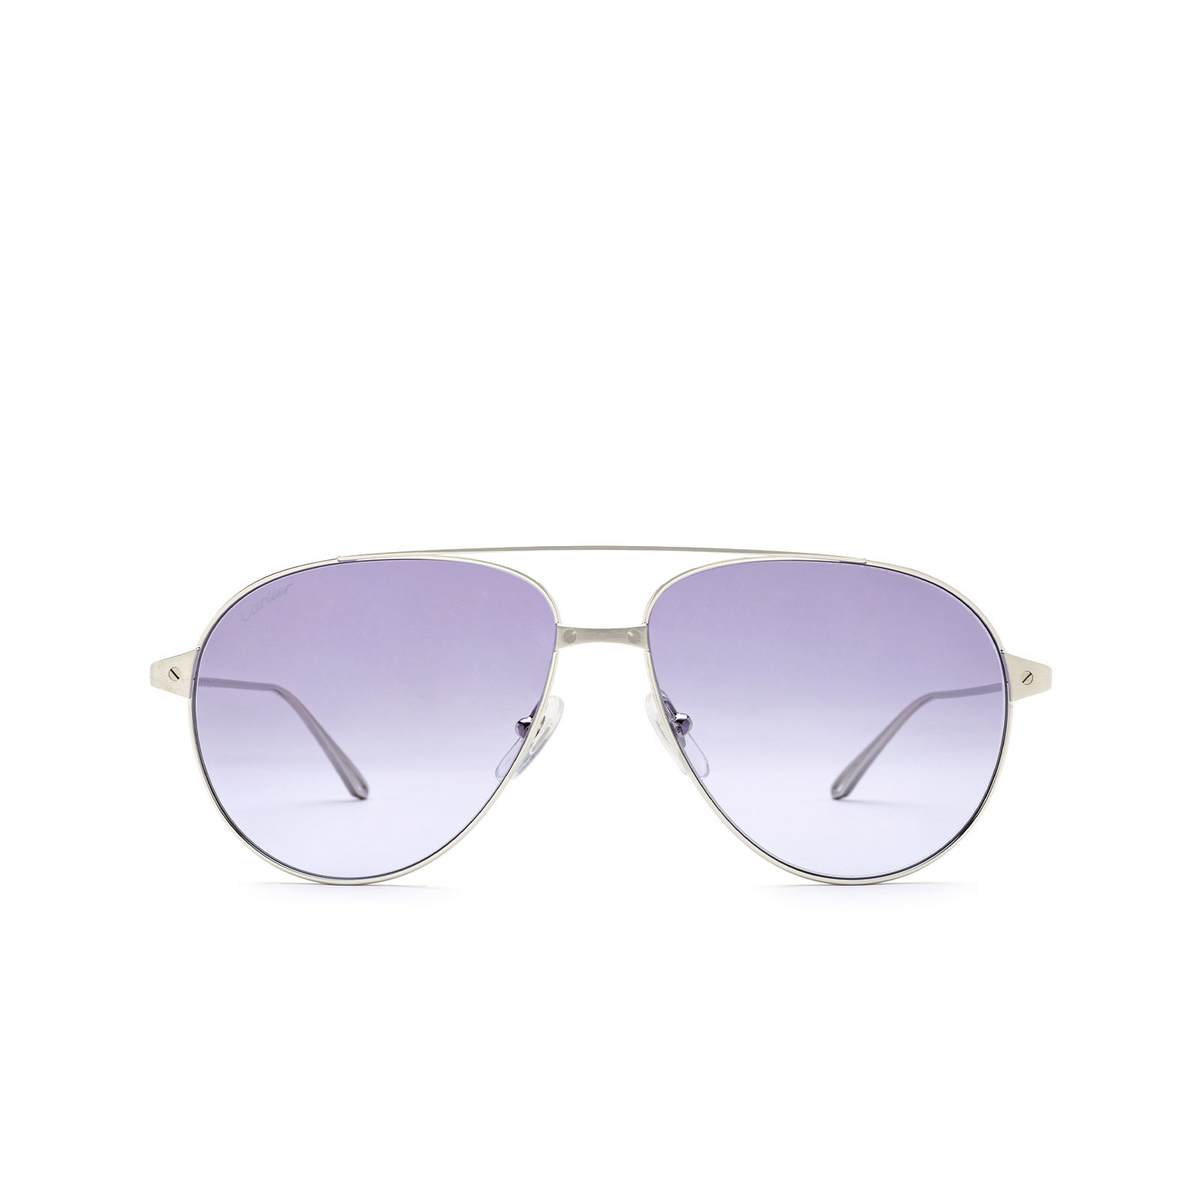 Cartier® Aviator Sunglasses: CT0298S color Silver 010 - front view.